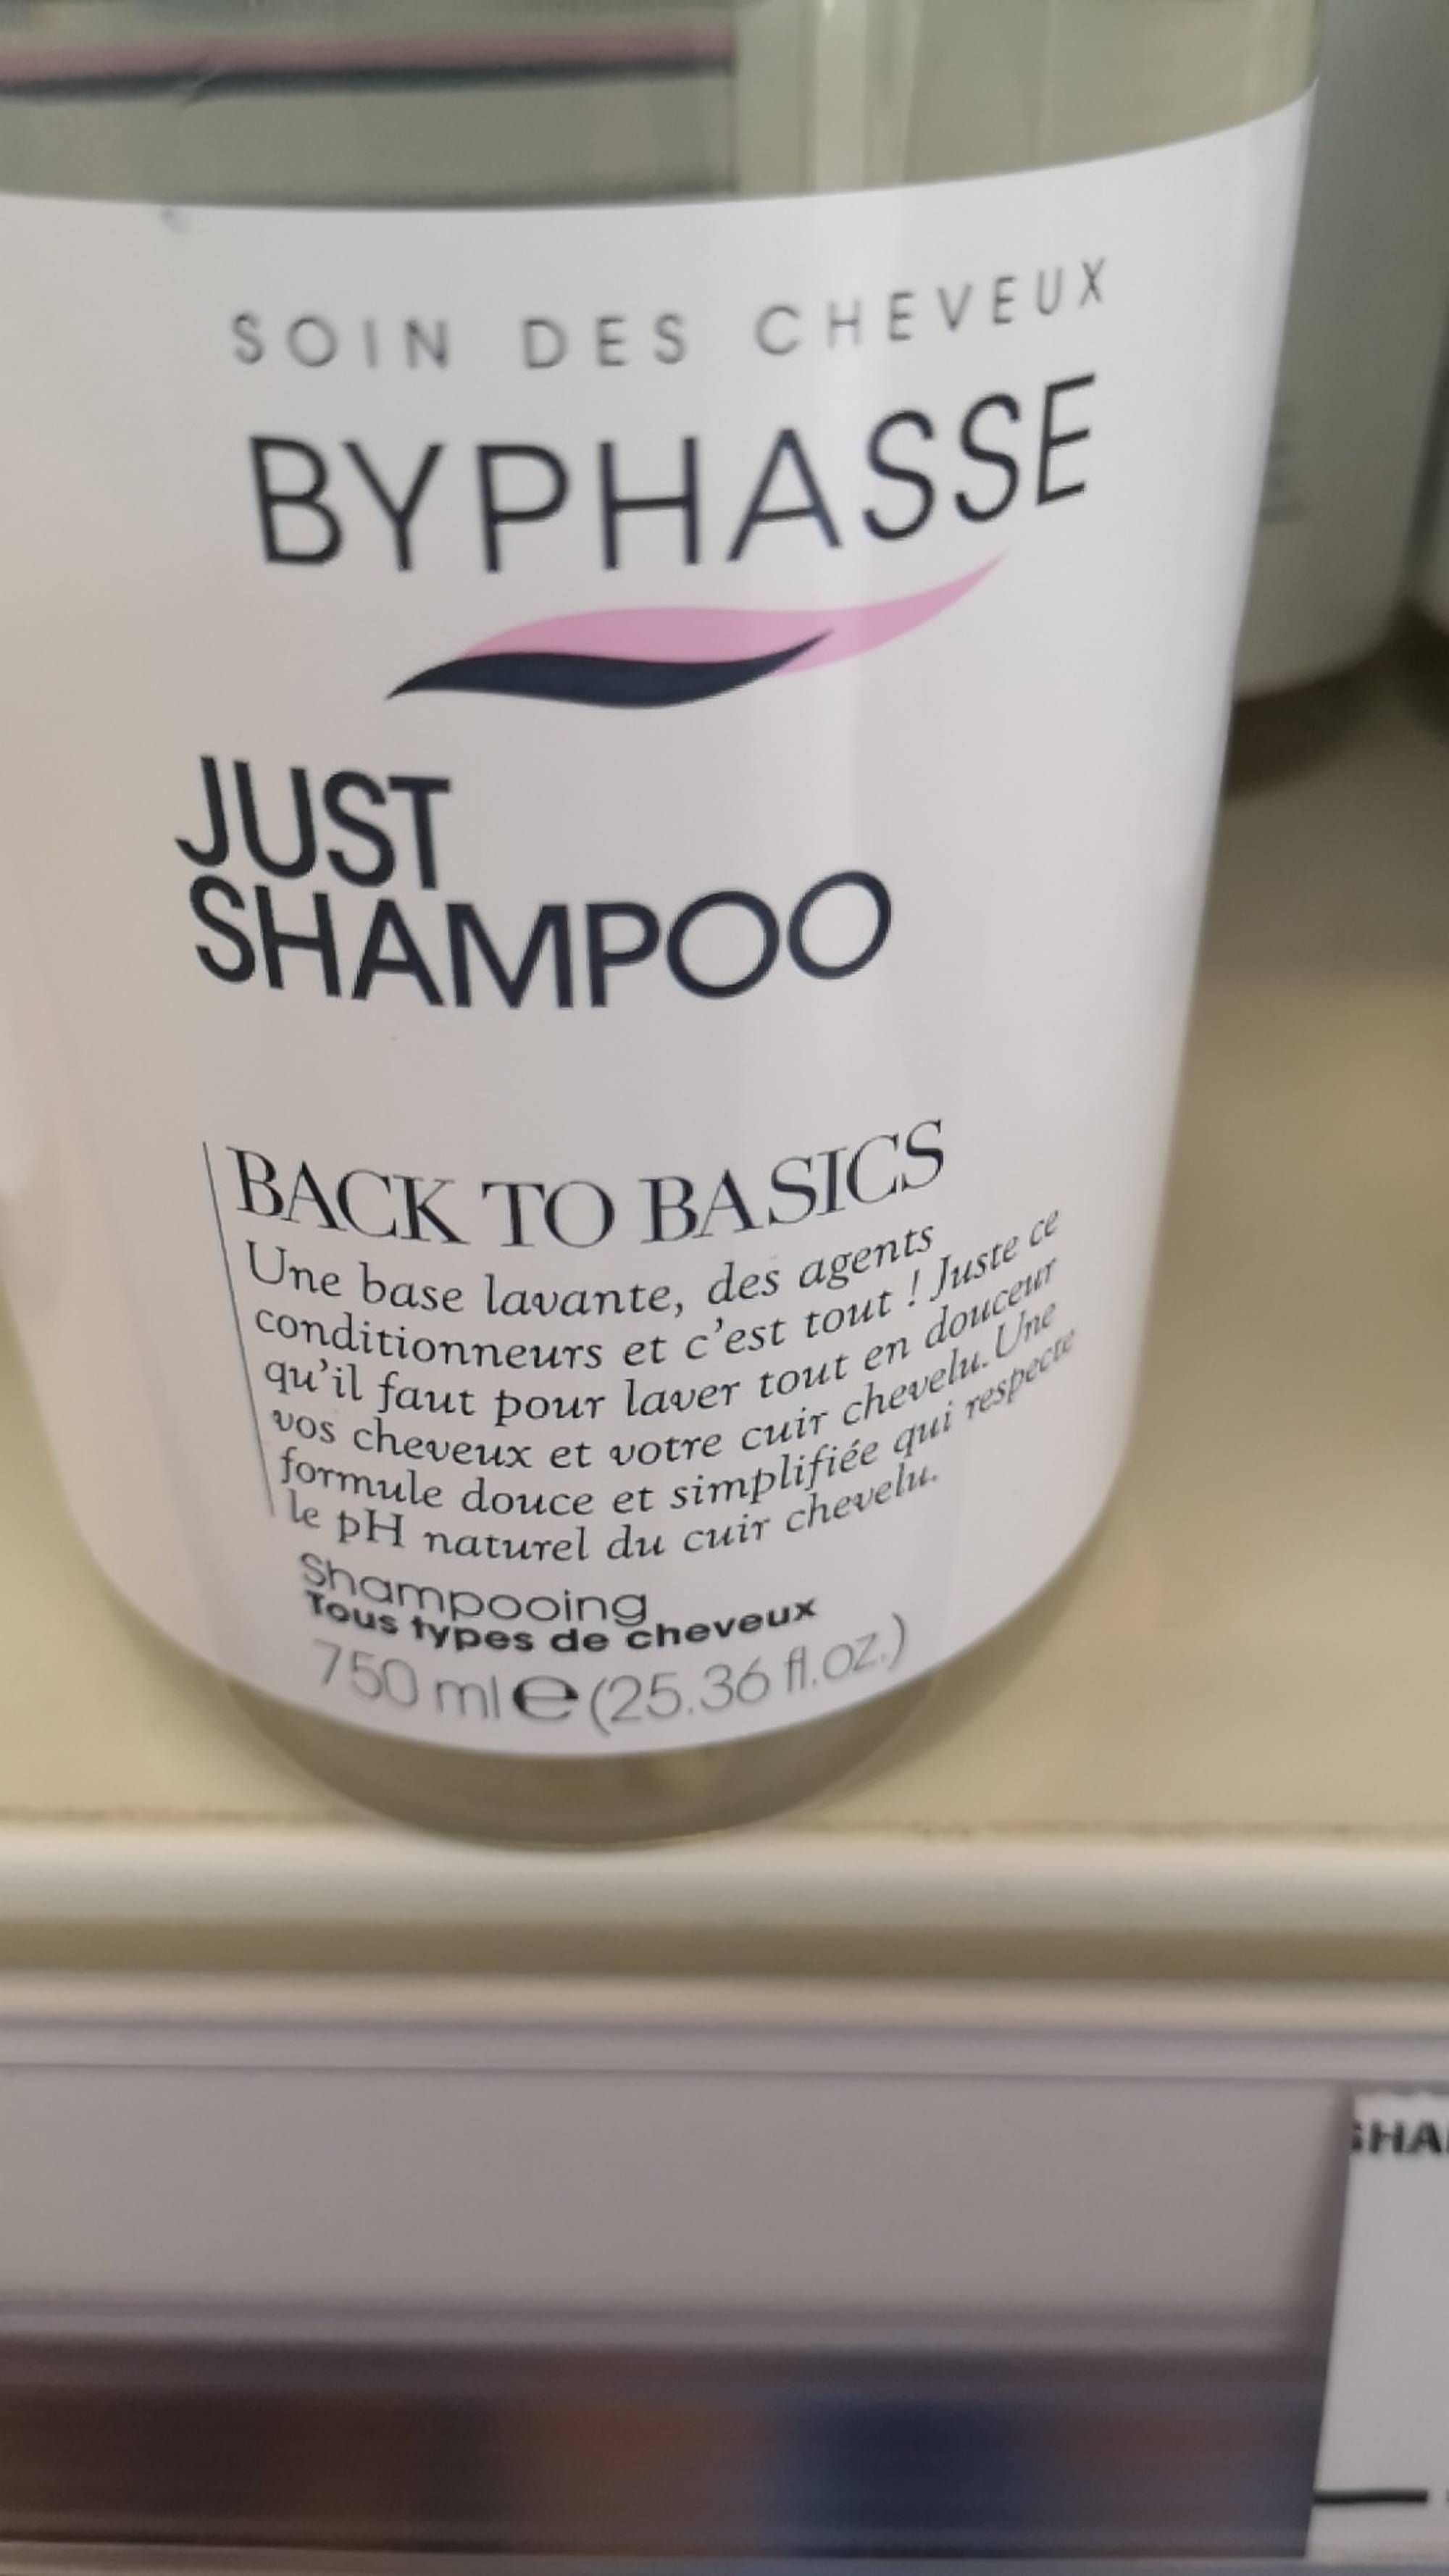 BYPHASSE - Just shampoo